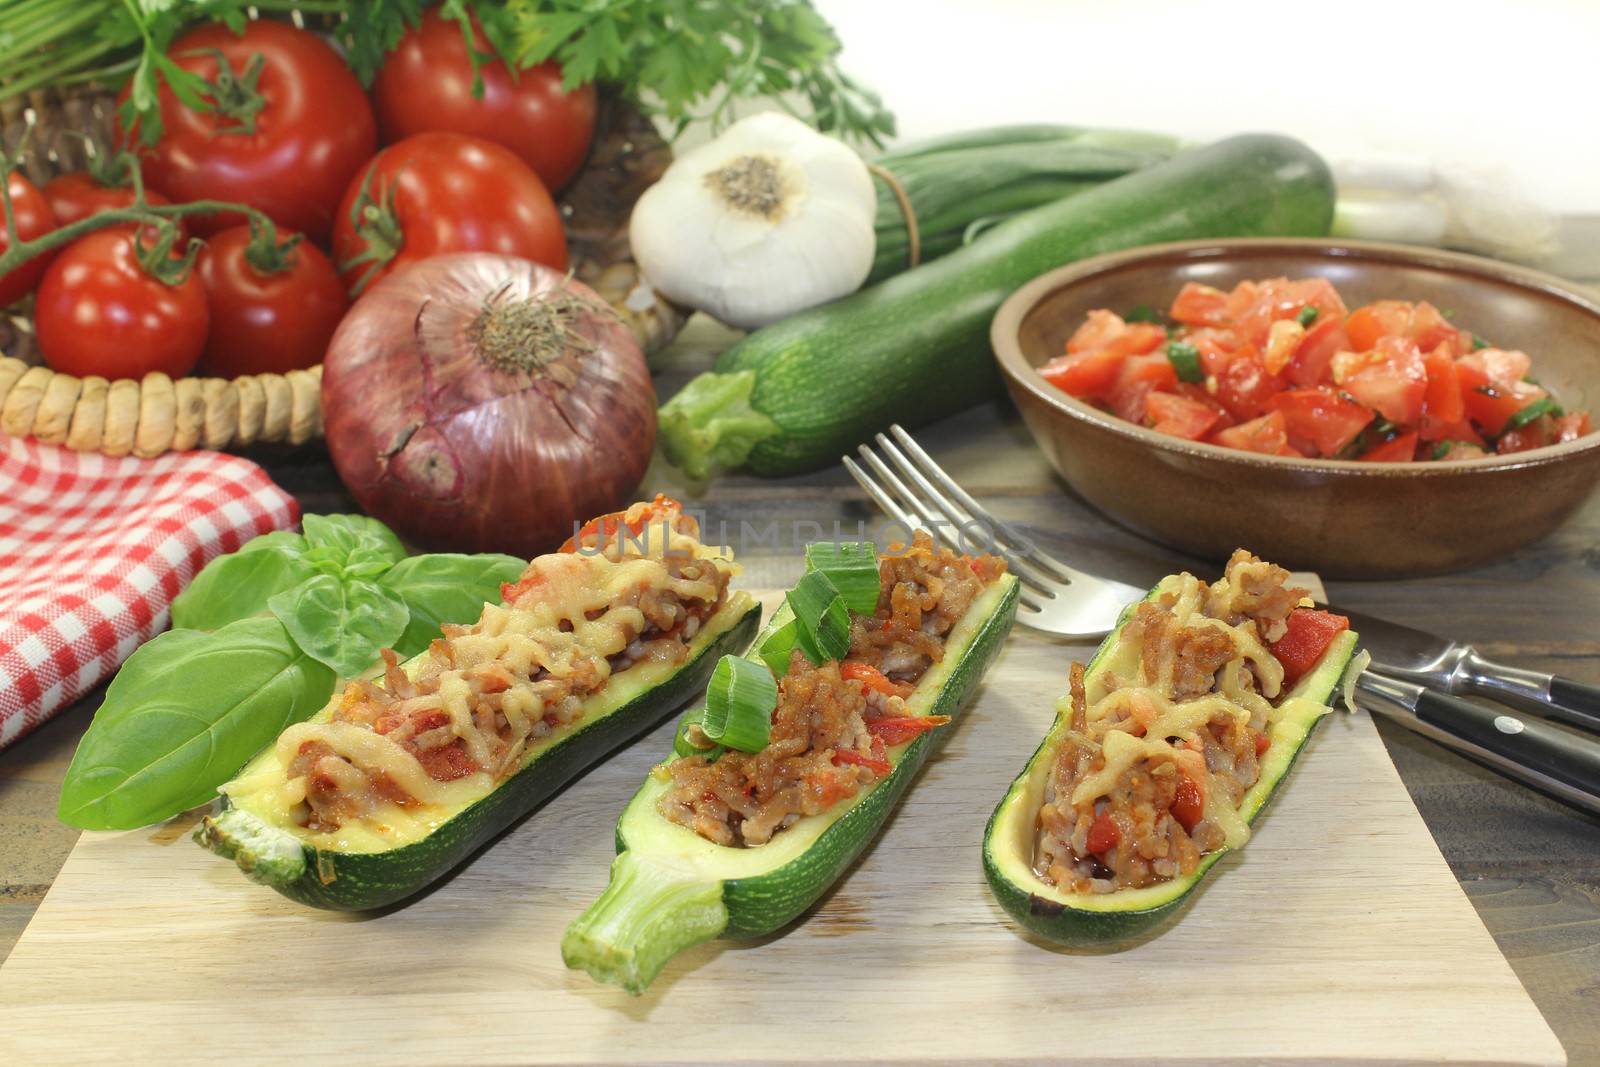 stuffed courgette by silencefoto